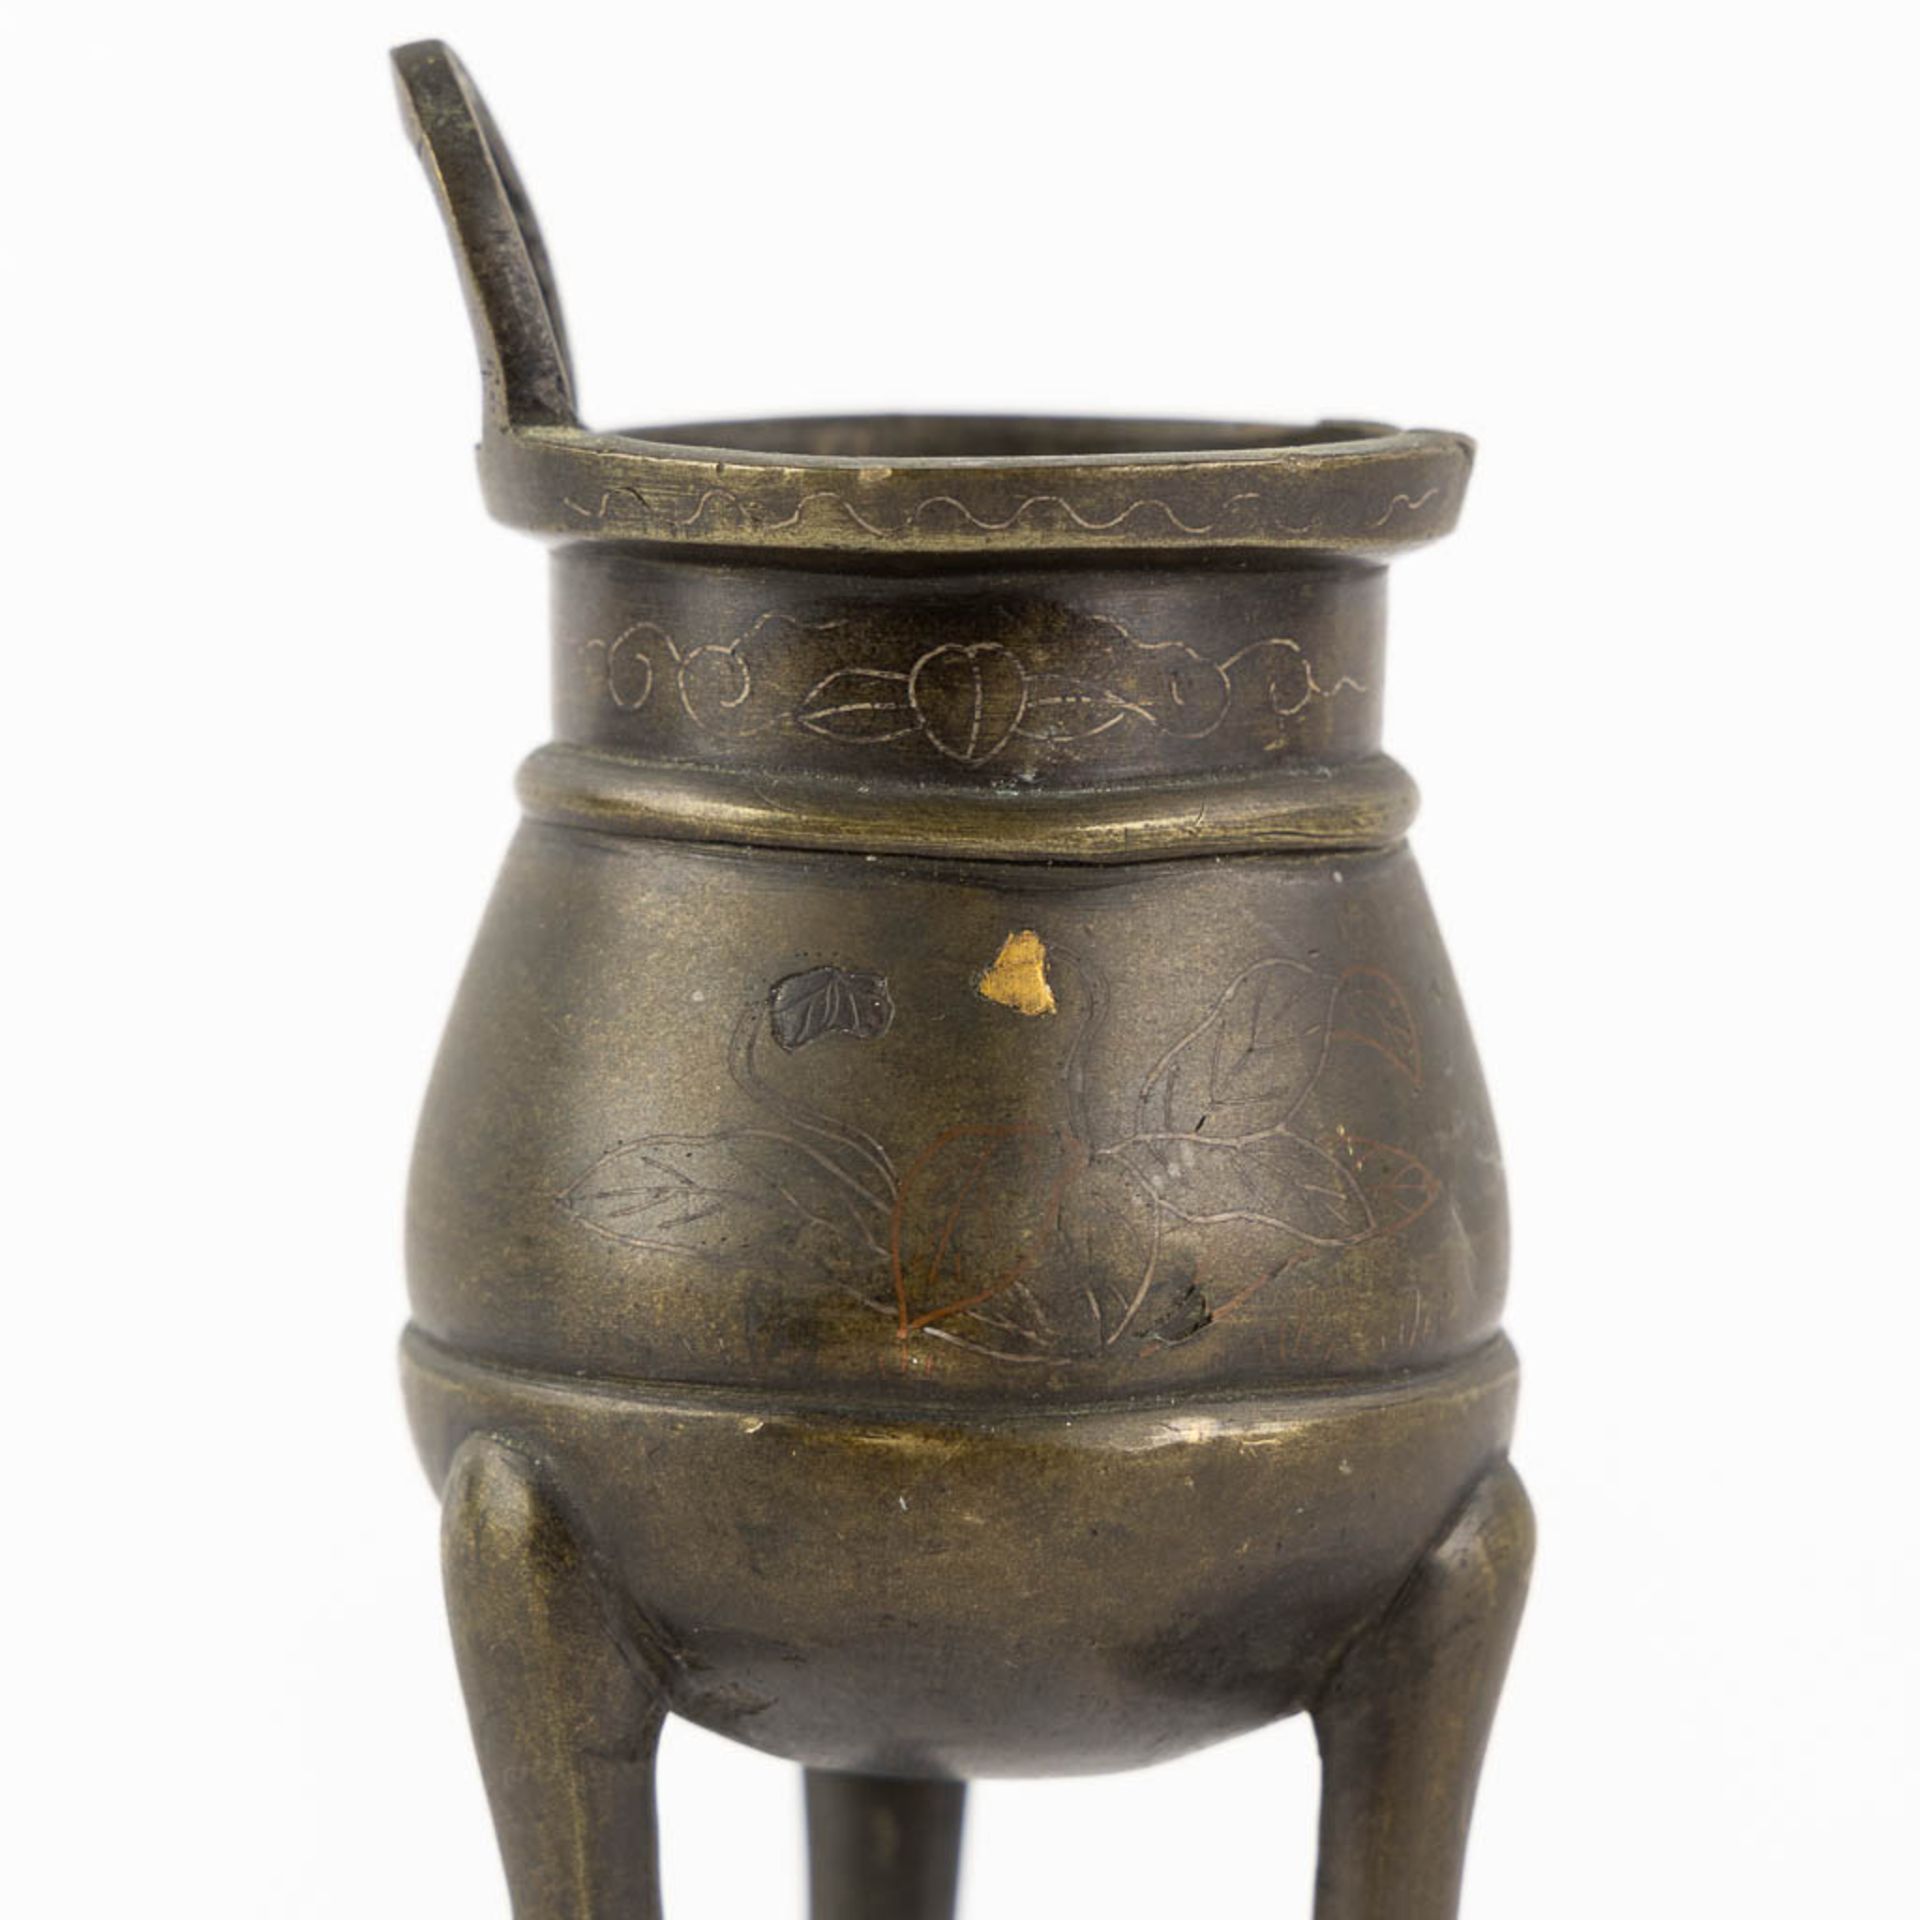 A Chinese insence burner, vase and a lucky coin. Bronze. (H:19 x D:5 cm) - Image 17 of 19